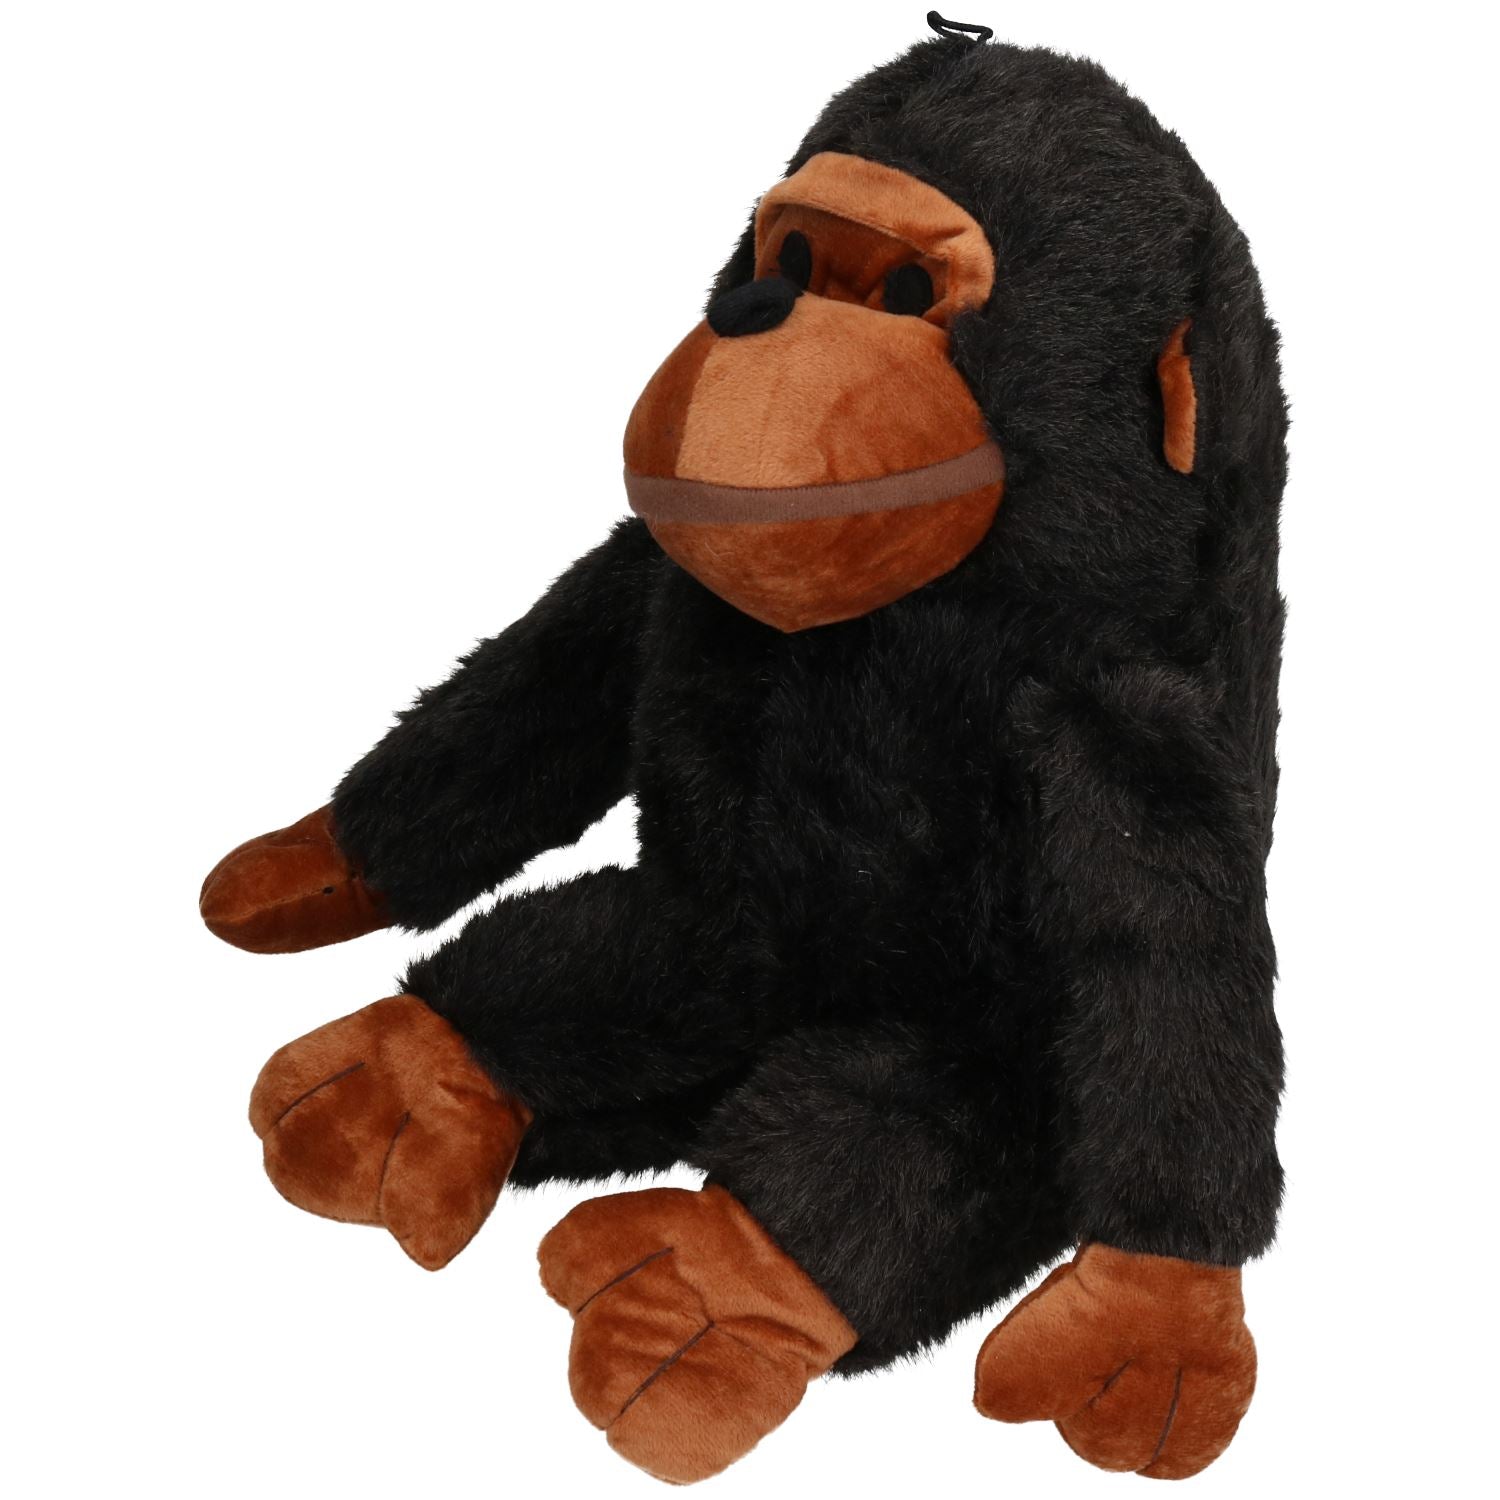 Big Buddie Chunky The Chimp Dog Toy With Squeak & Monkey Chatter